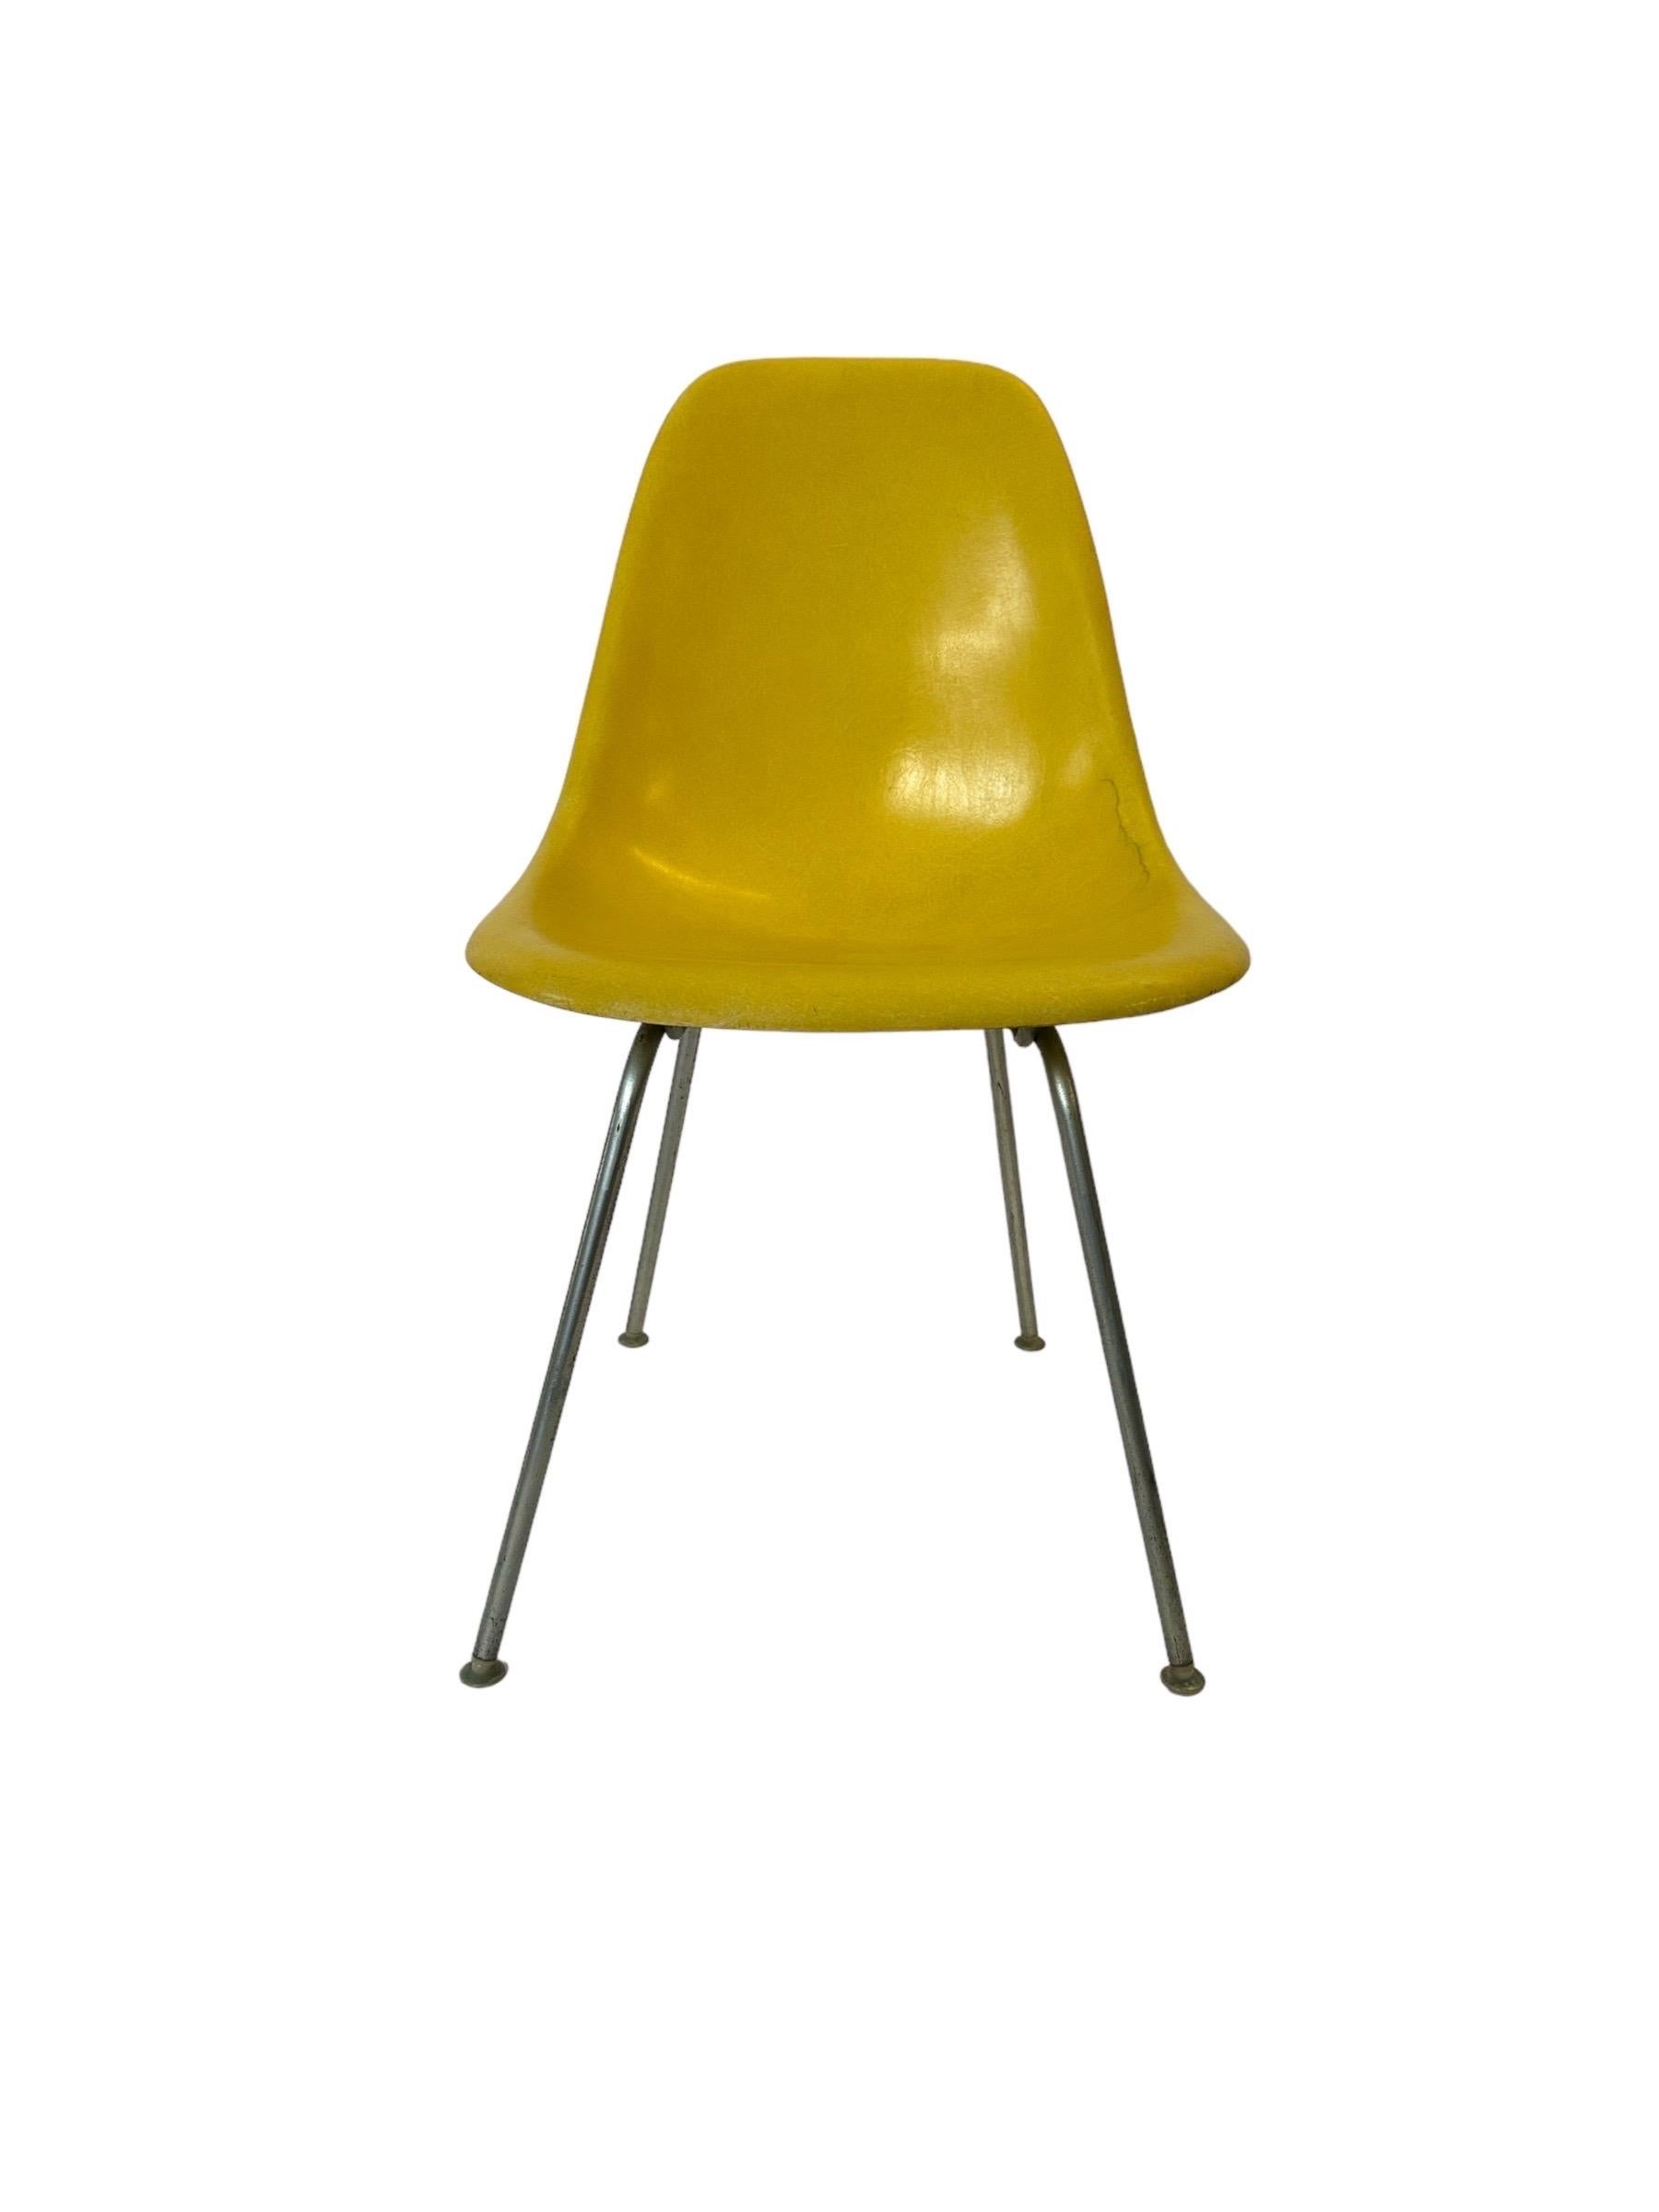 American Herman Miller Eames Fiberglass Dining Chair in Brilliant Yellow For Sale